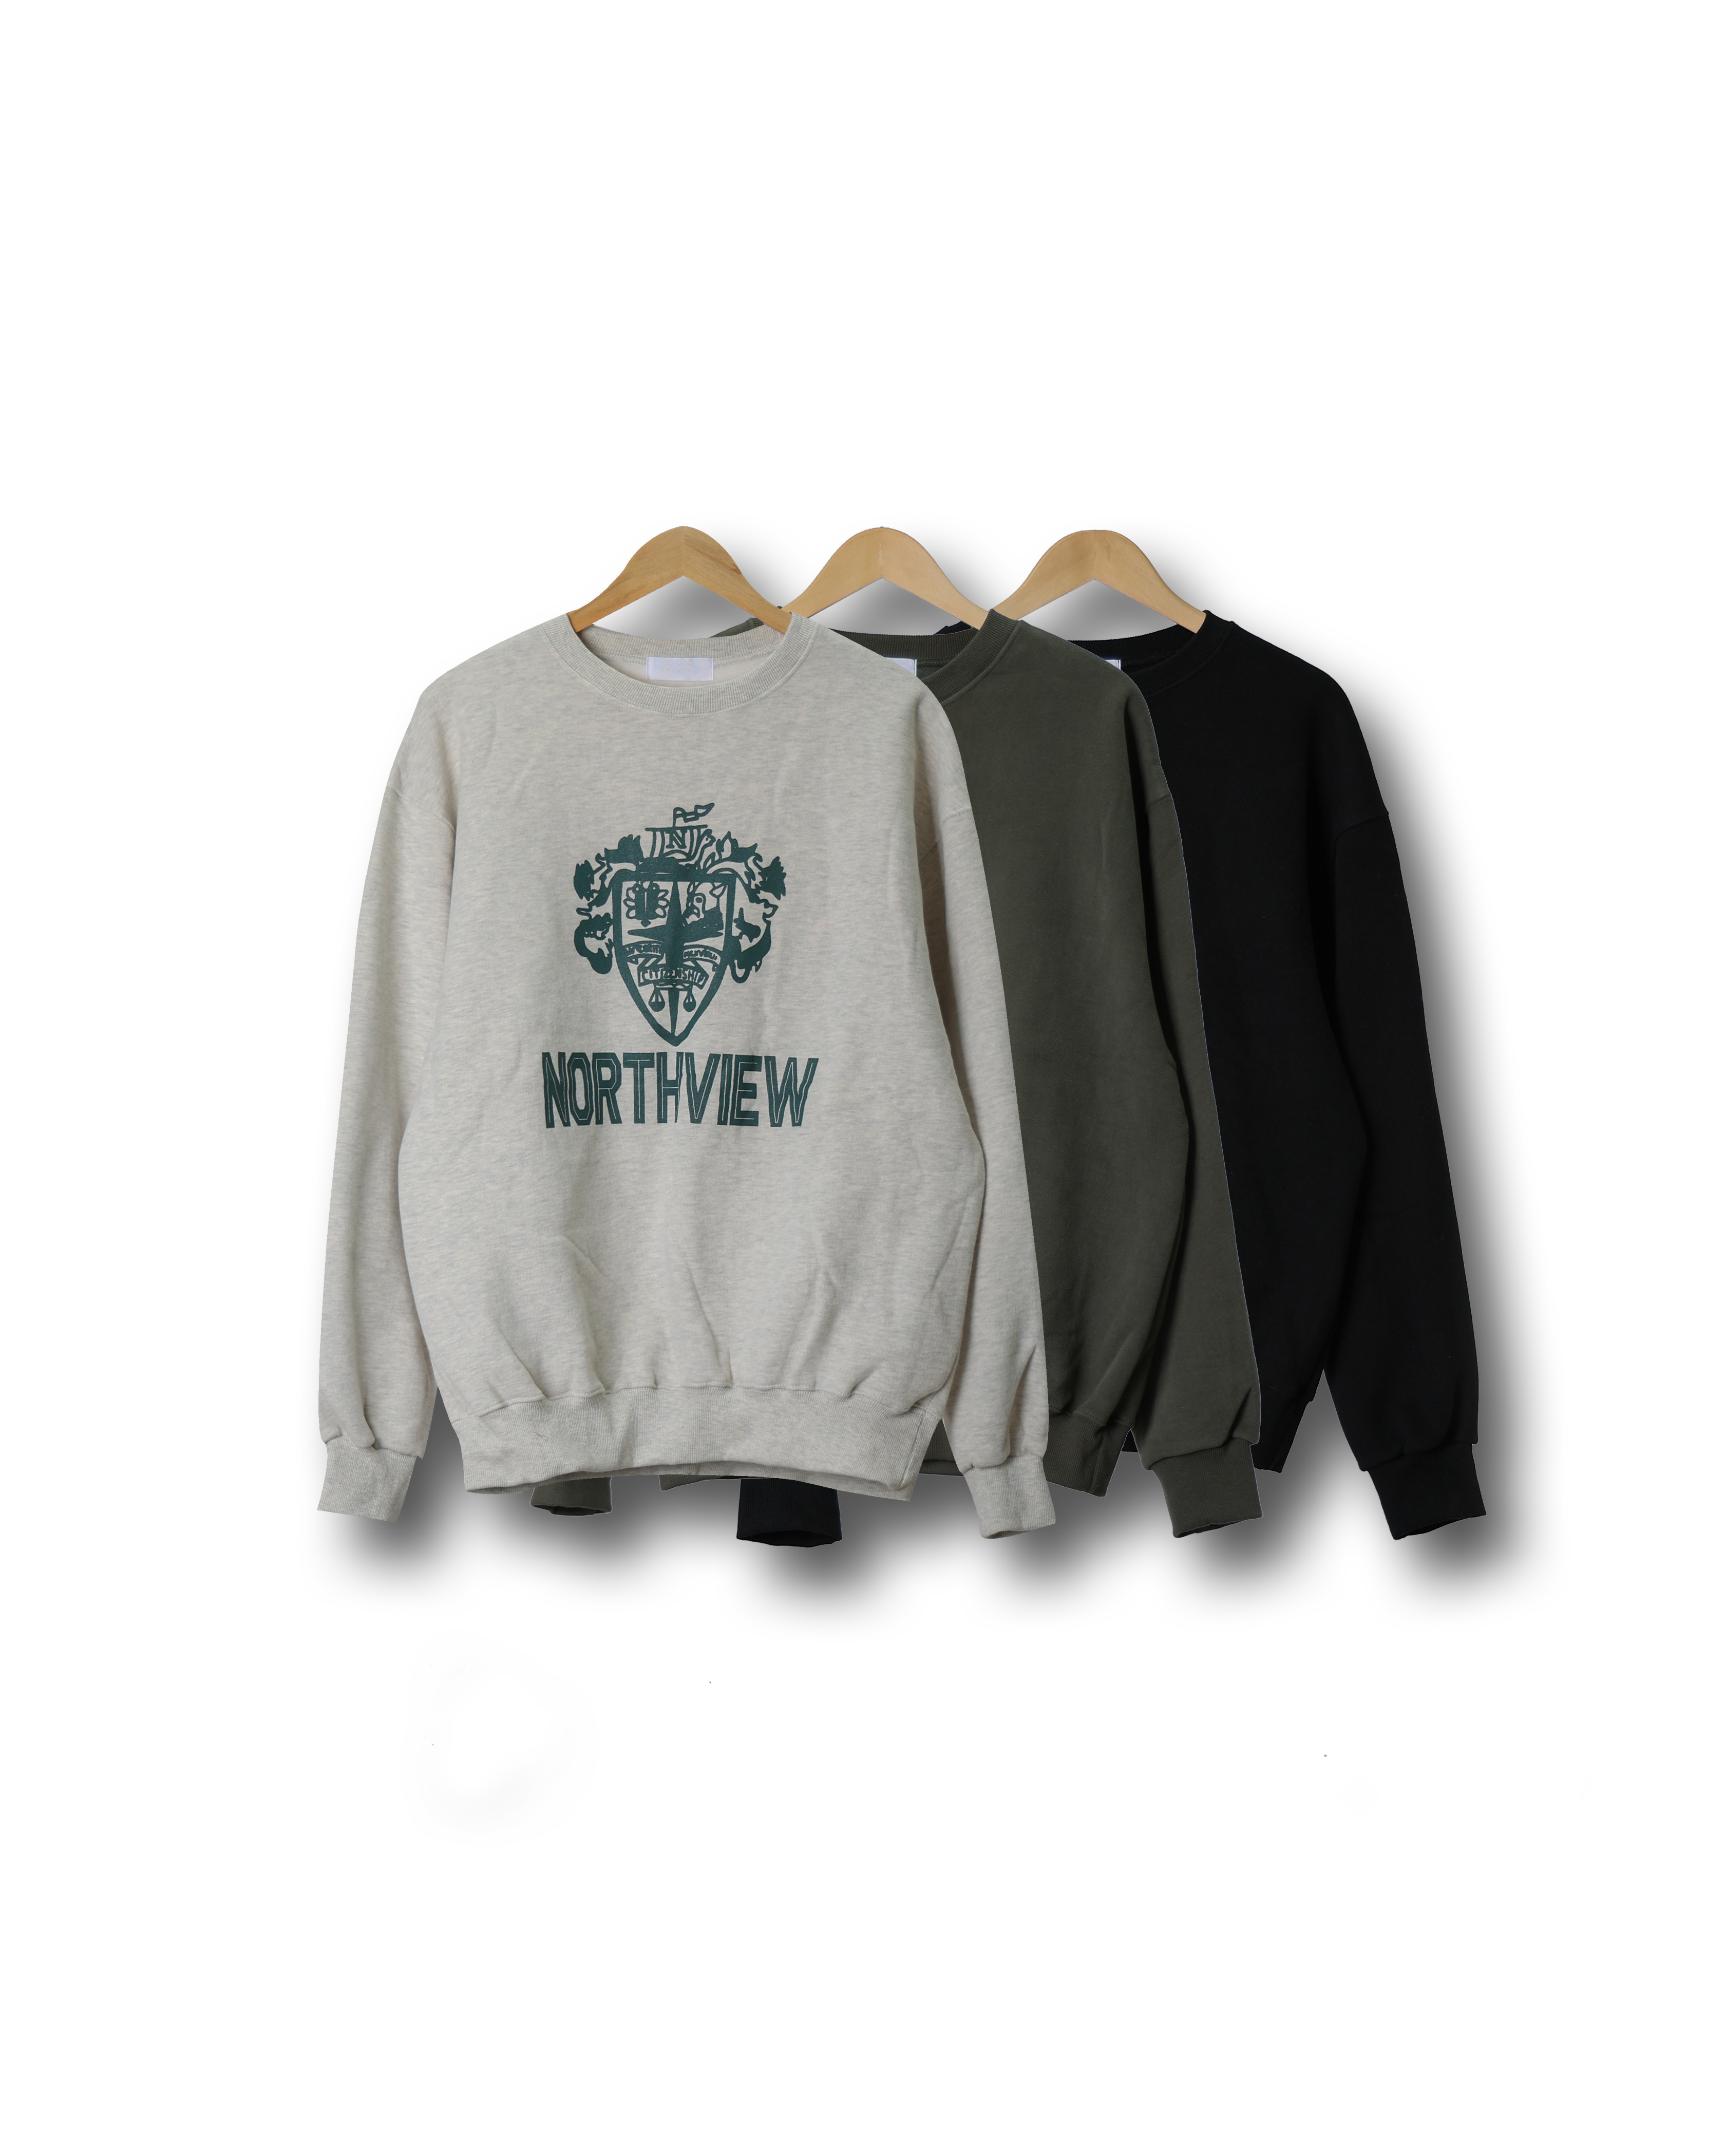 AIEM NORTHVIEW Brush Over Sweat Shirts (Black/Olive/Oatmeal)